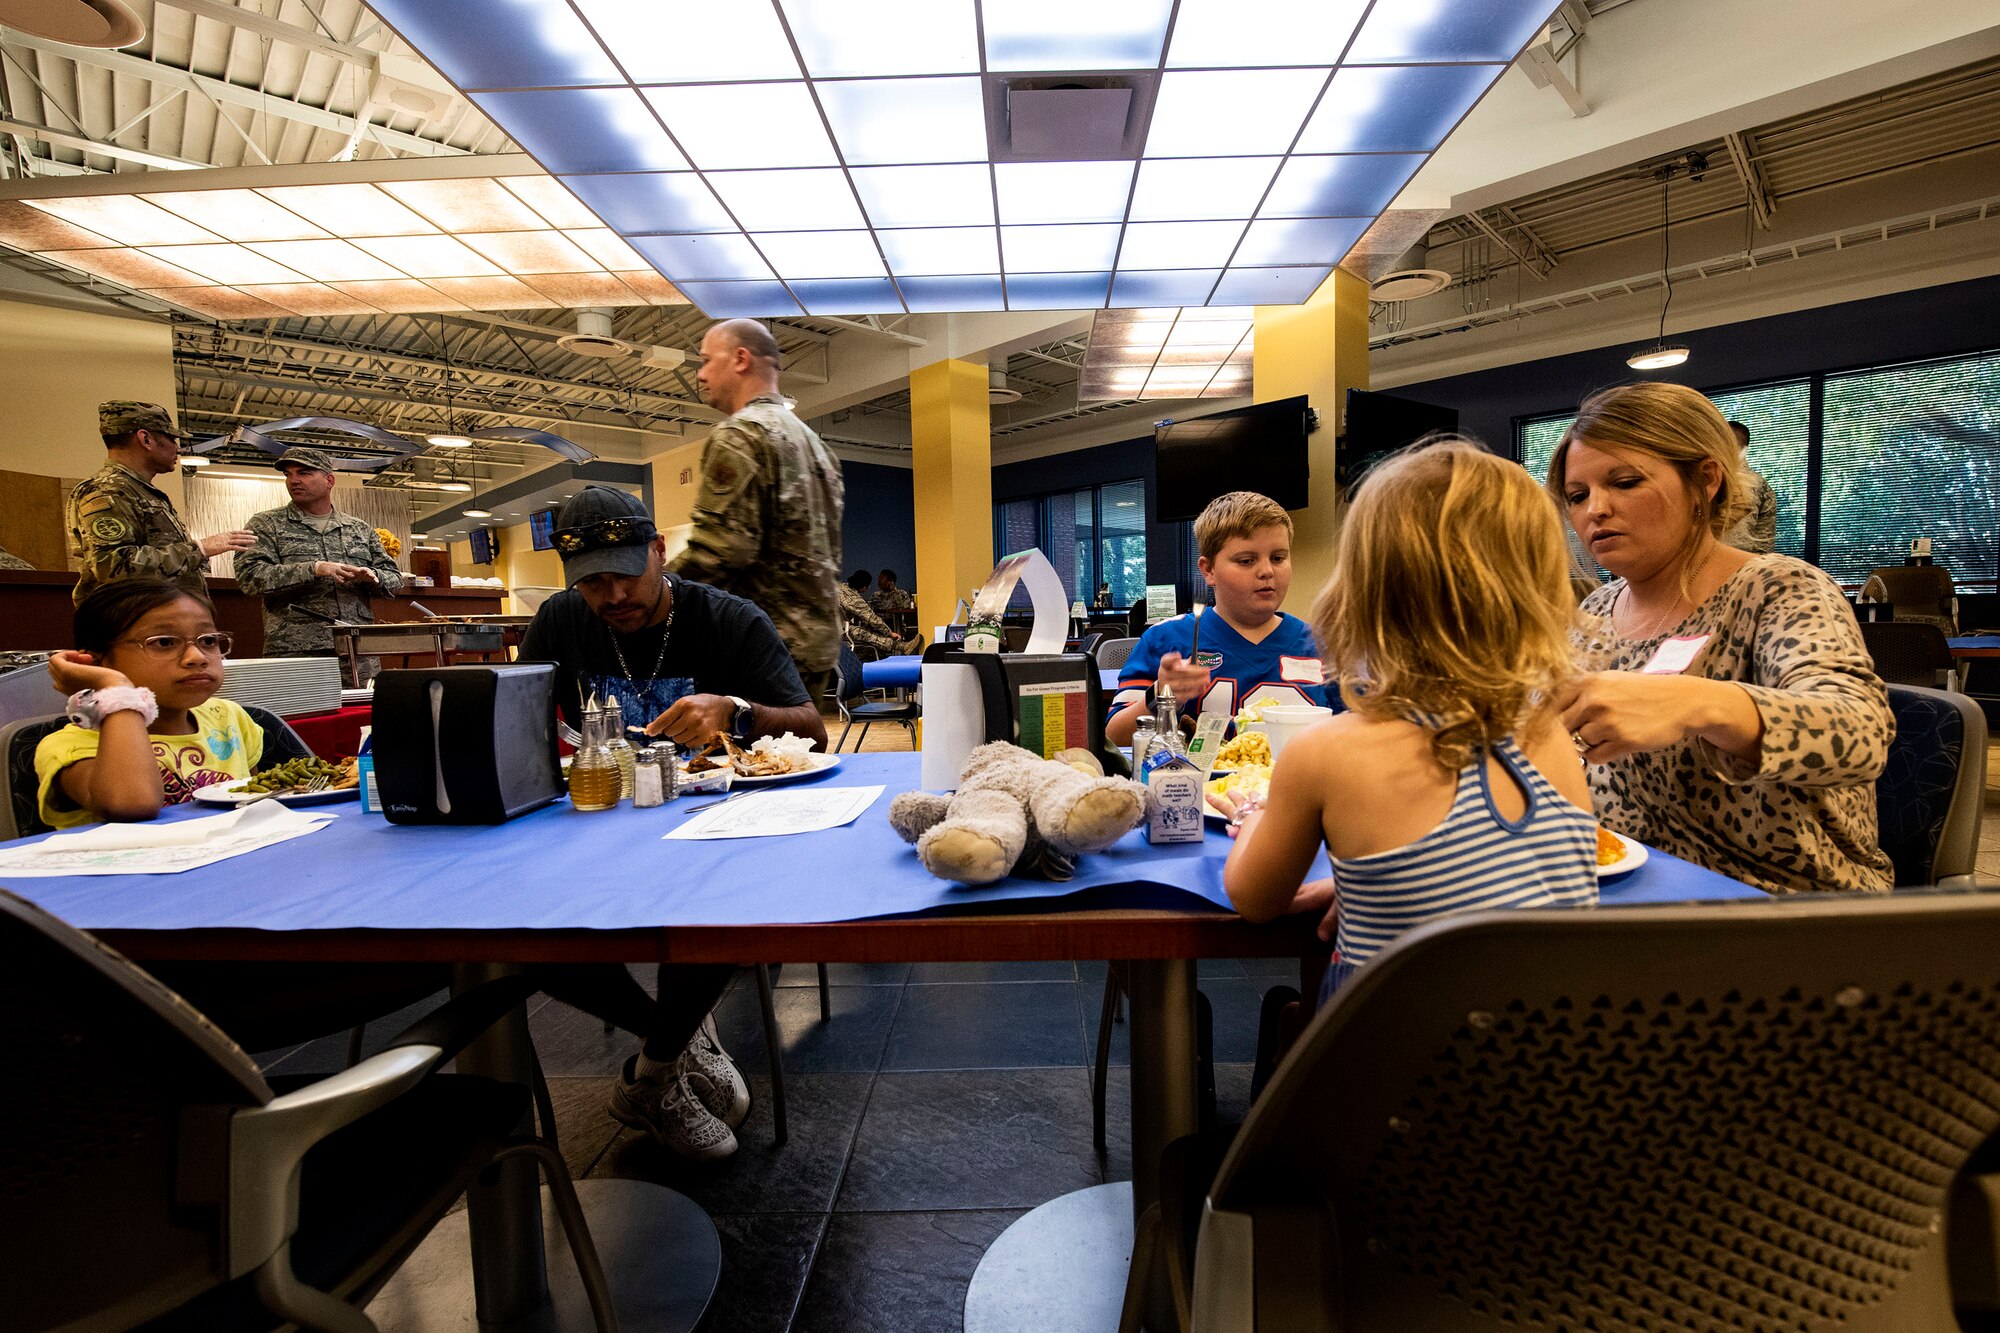 Families eat together during a Deployed Spouses Dinner Sept. 17, 2019, at Moody Air Force Base, Ga. The monthly event is a free dinner at Georgia Pines Dining Facility designed as a ‘thank you’ for each families’ support and sacrifice. The dinner, occurring on every third Tuesday of the month, provides an opportunity for spouses to interact with other families of deployed Airmen, key spouses and unit leadership, as well as provide a break for the spouse while military sponsor is deployed. The next Deployed Spouses Dinner will be Oct. 15. (U.S. Air Force photo by Senior Airman Erick Requadt)